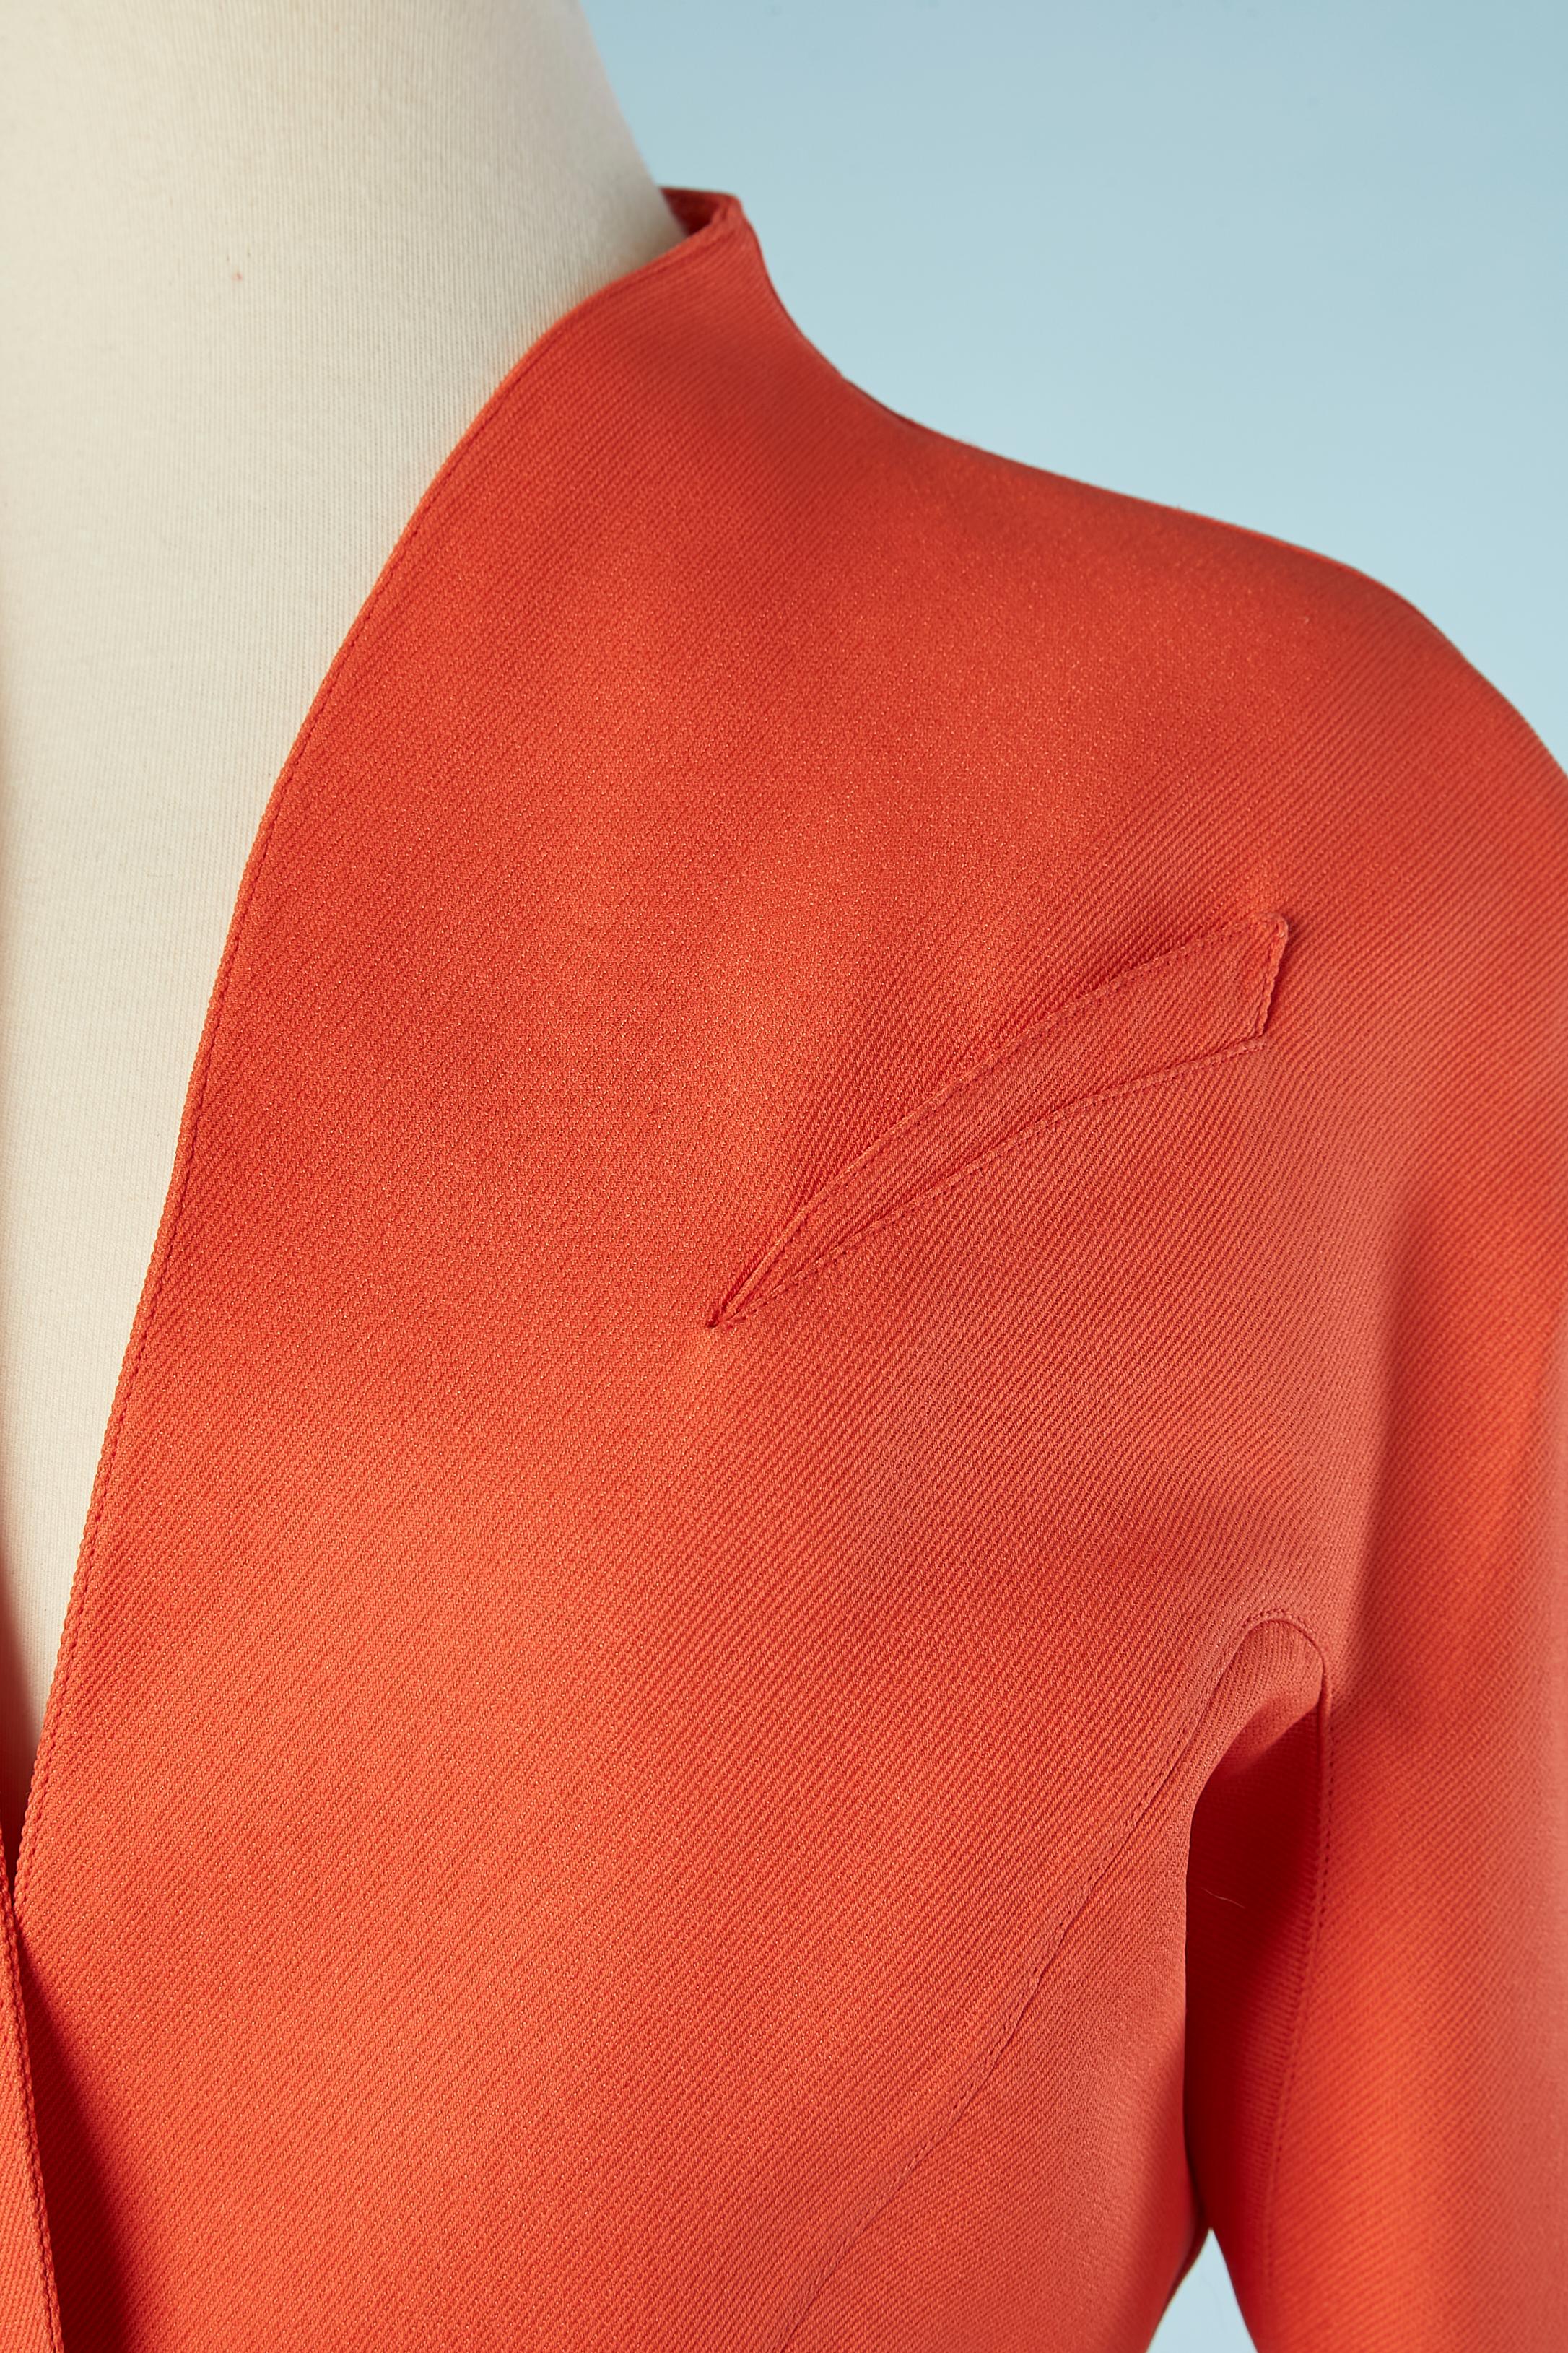 Orange  single-breasted jacket with 3 snaps in the middle front.Fabric composition: 53% acetate, 47% rayon.  Silk lining. 
Cut-work. 
SIZE 38 (Fr) 8 (Us)